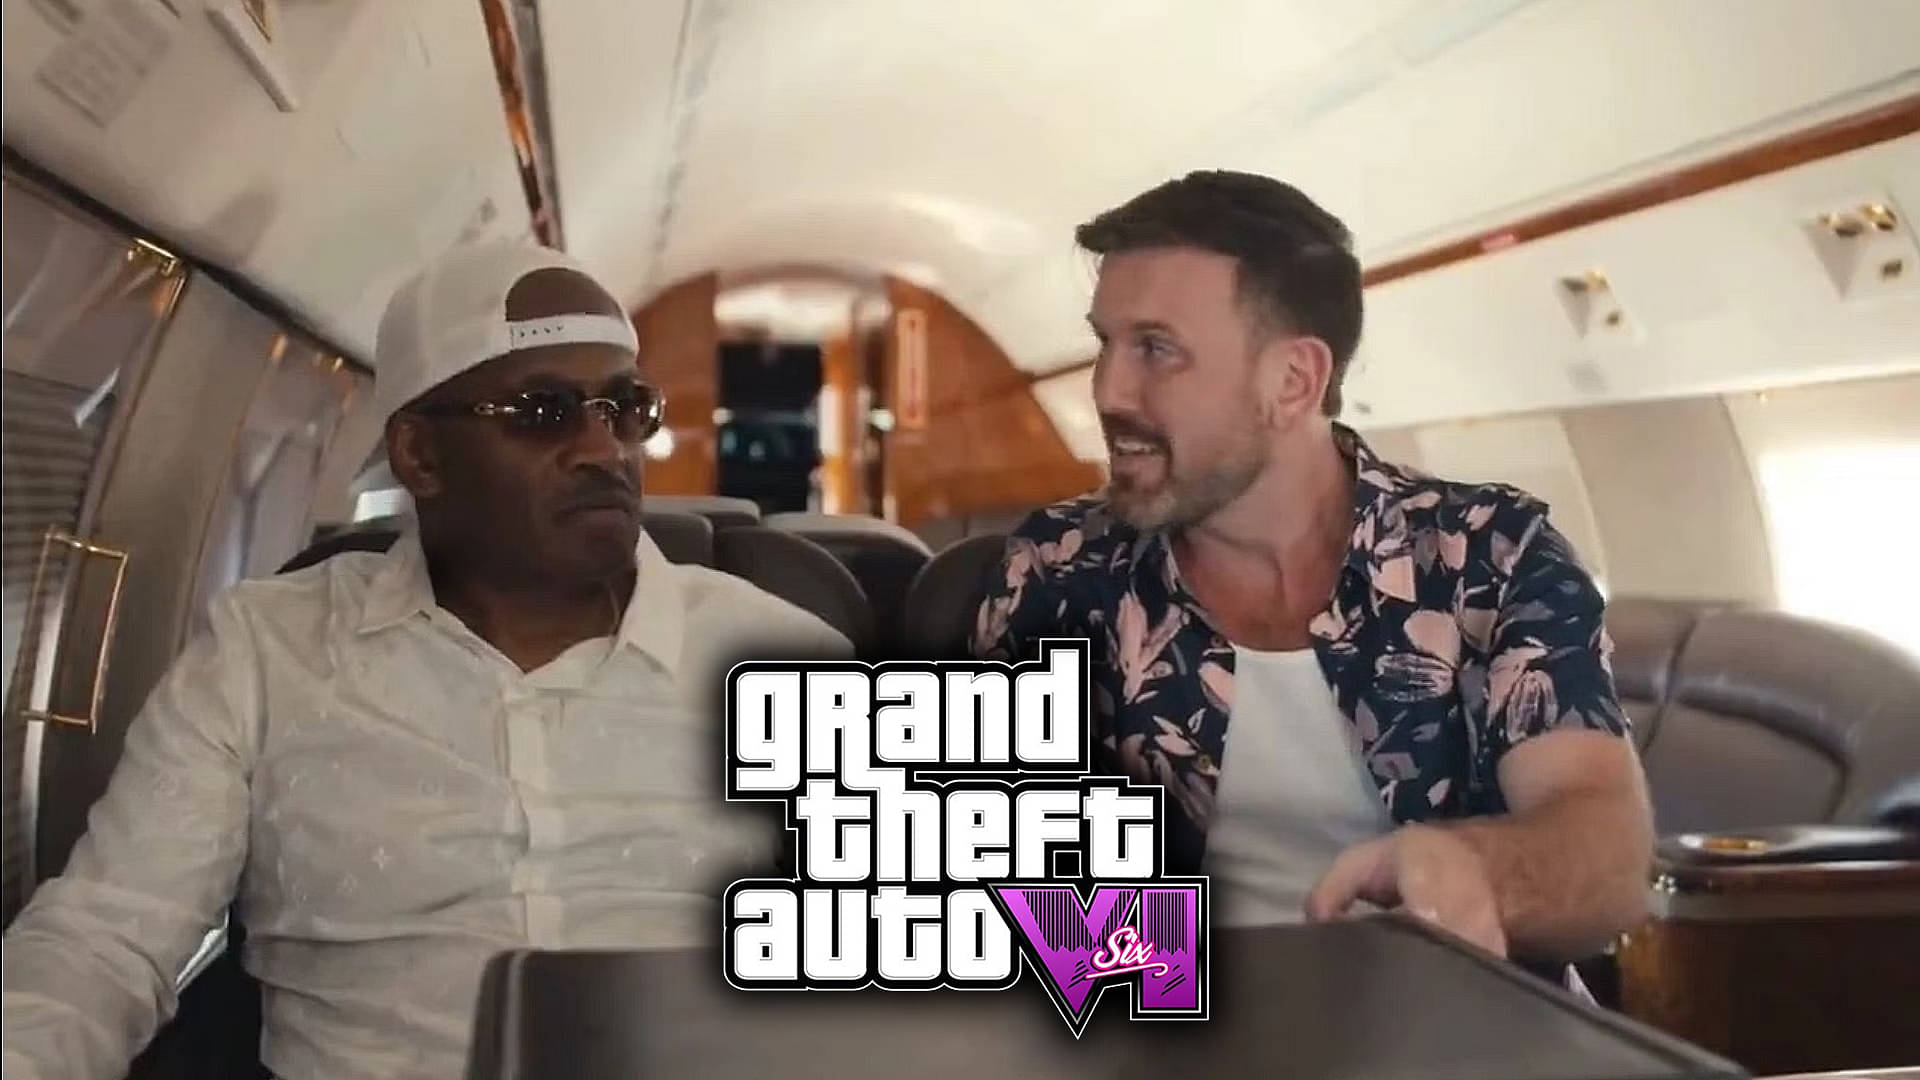 With the first trailer on its way, when will GTA 6 release? - The SportsRush